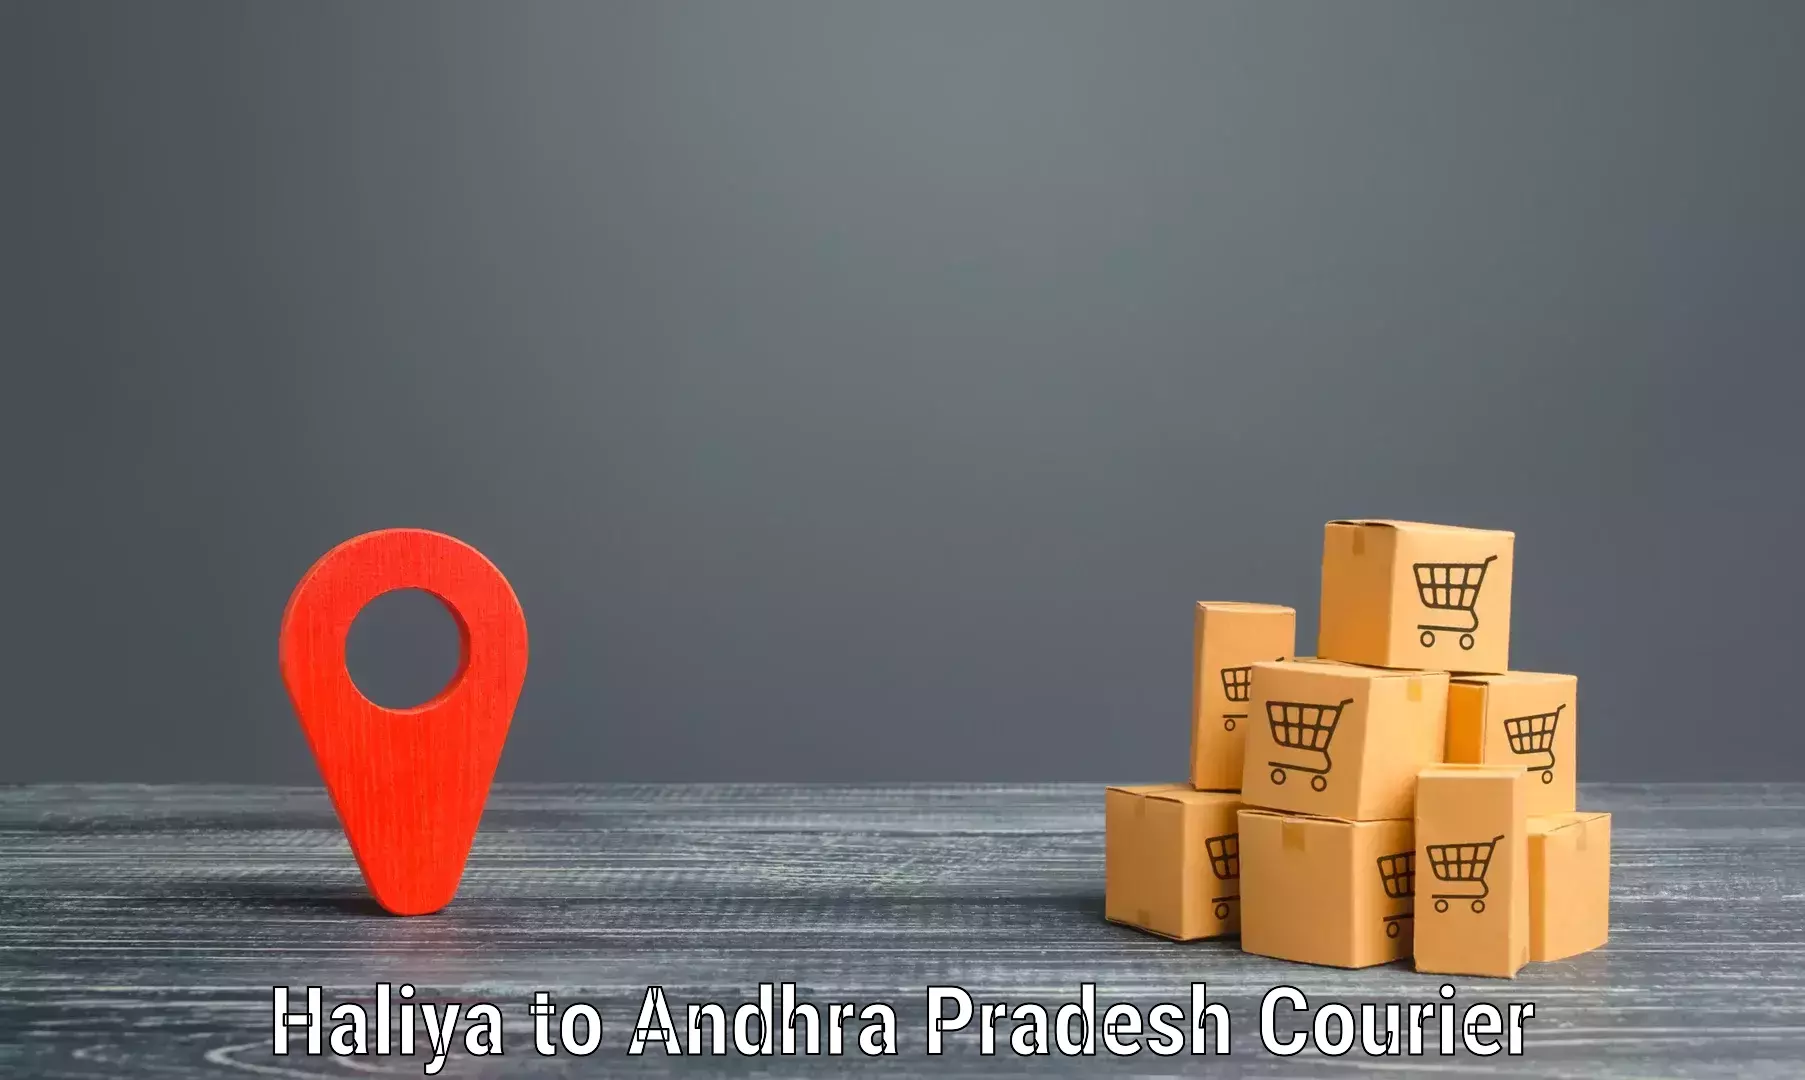 Quick courier services in Haliya to Pedabayalu